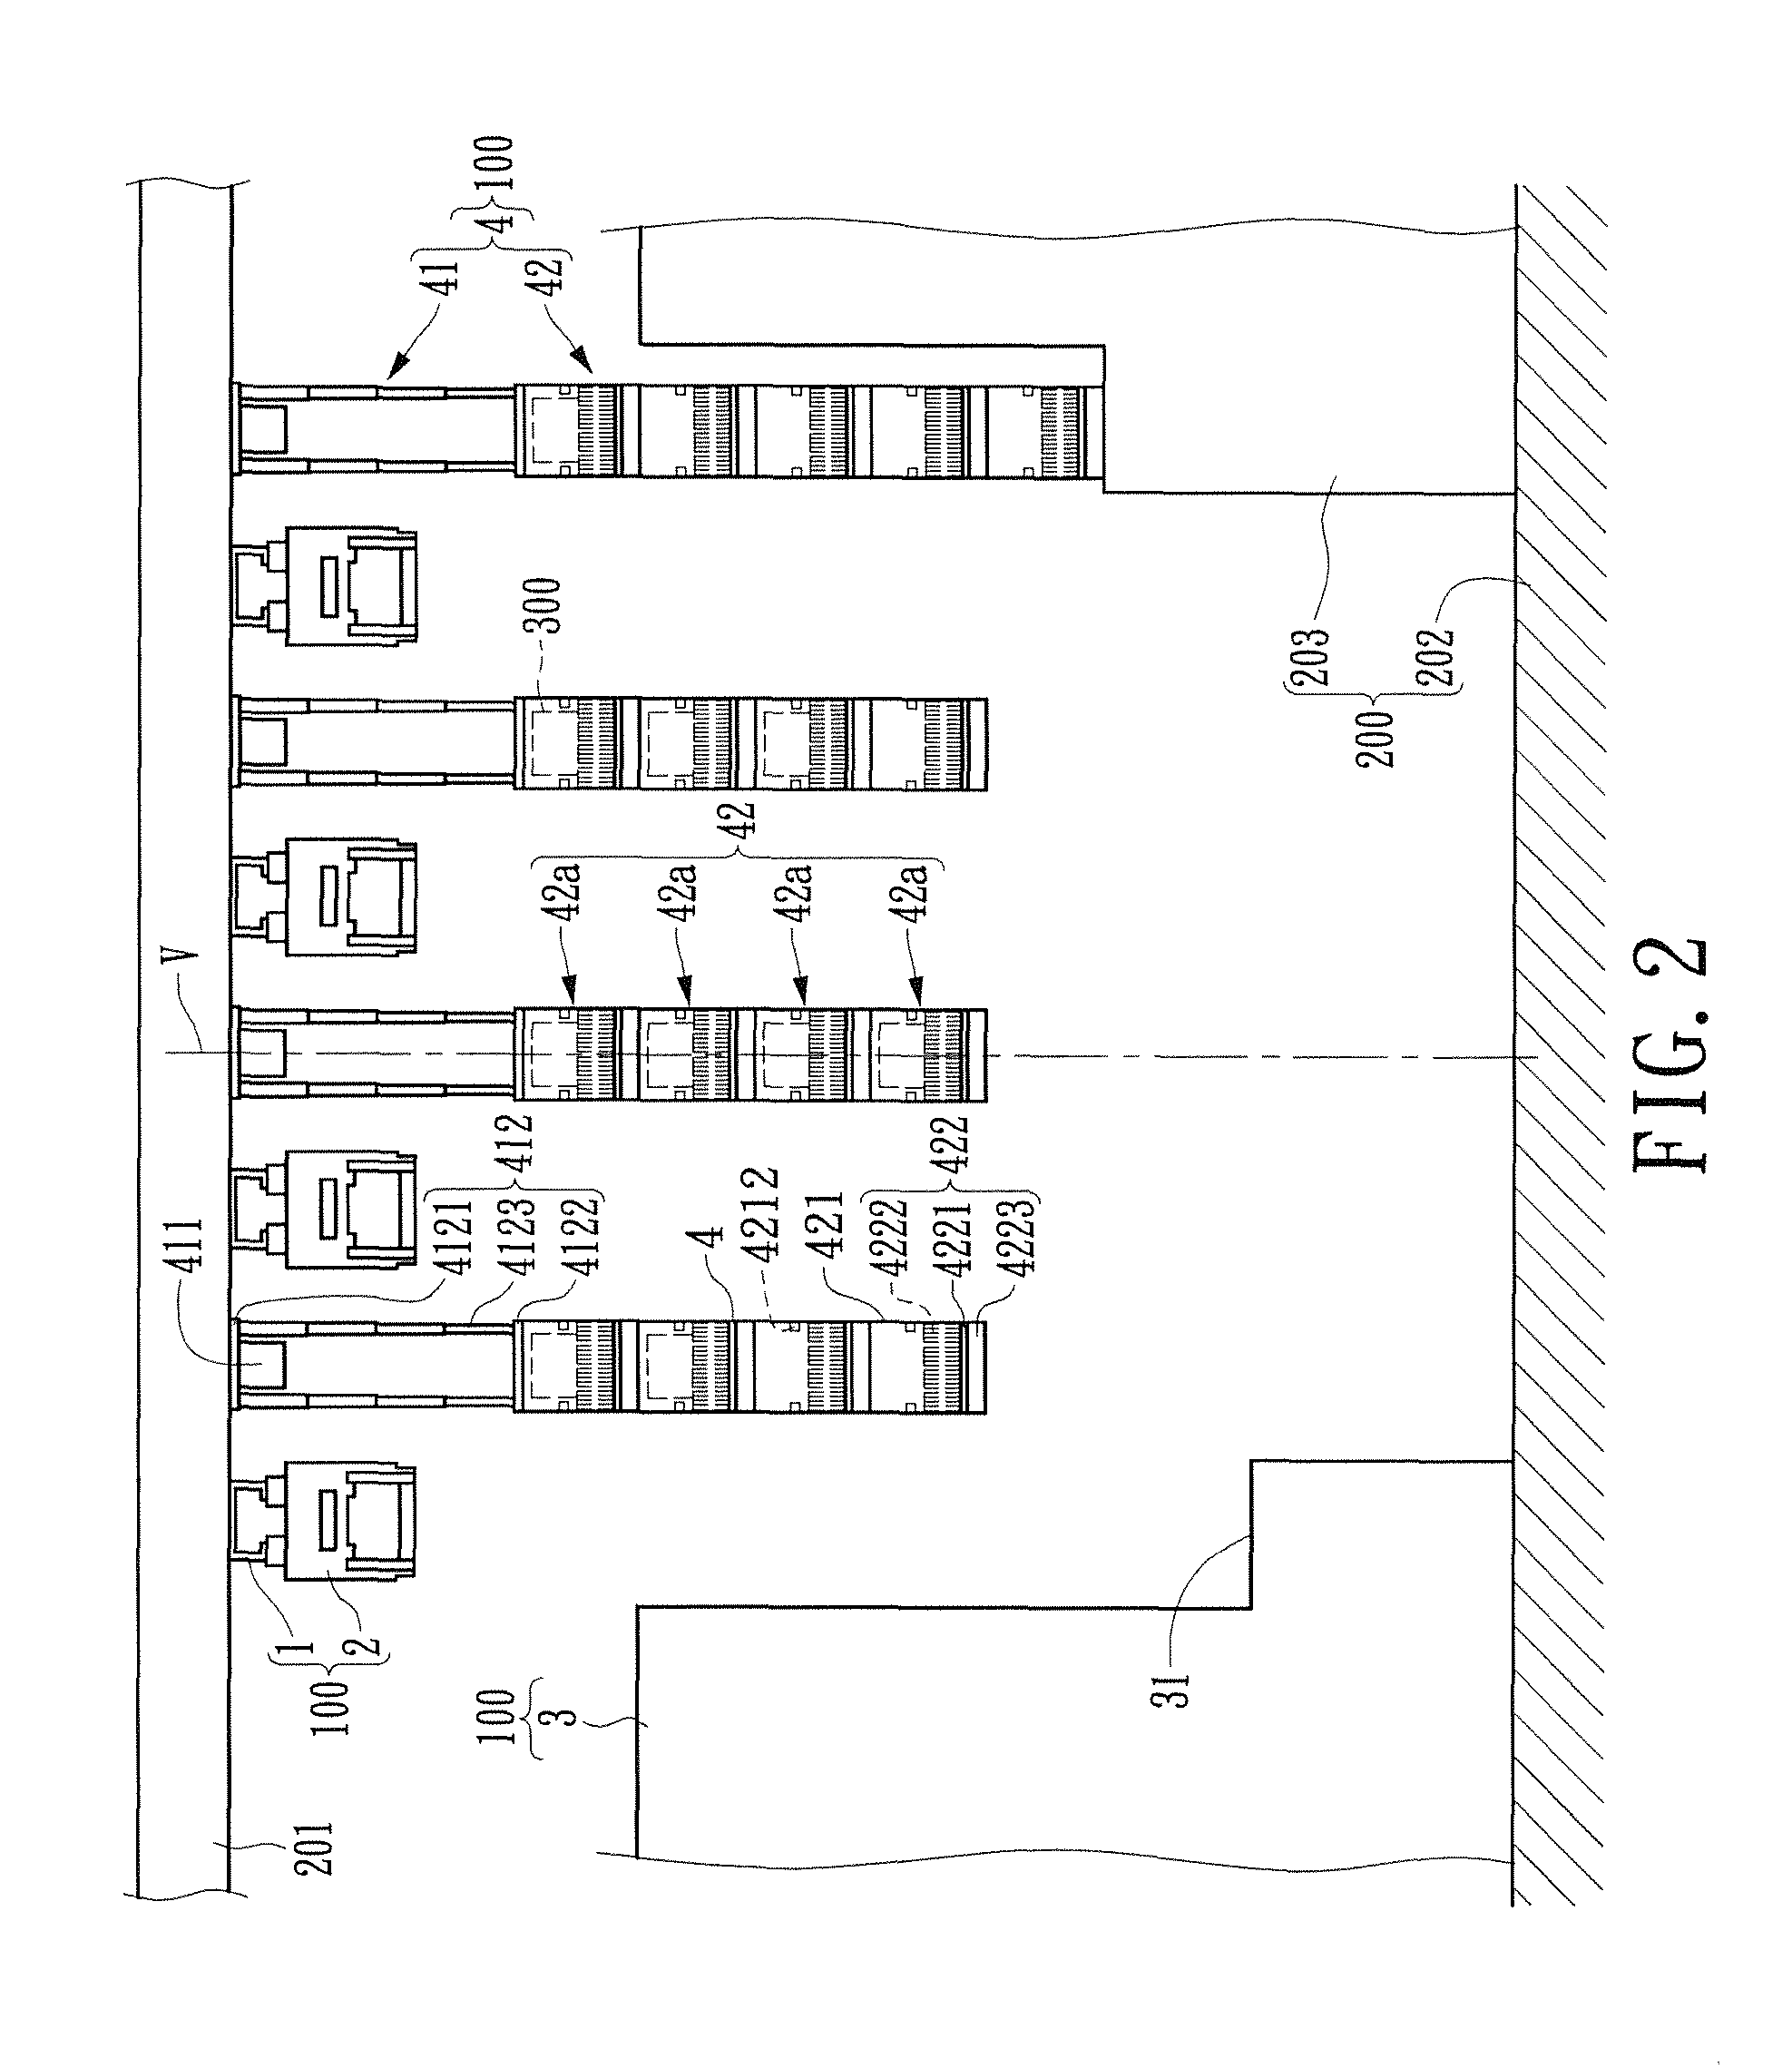 Overhead buffer device and wafer transport system